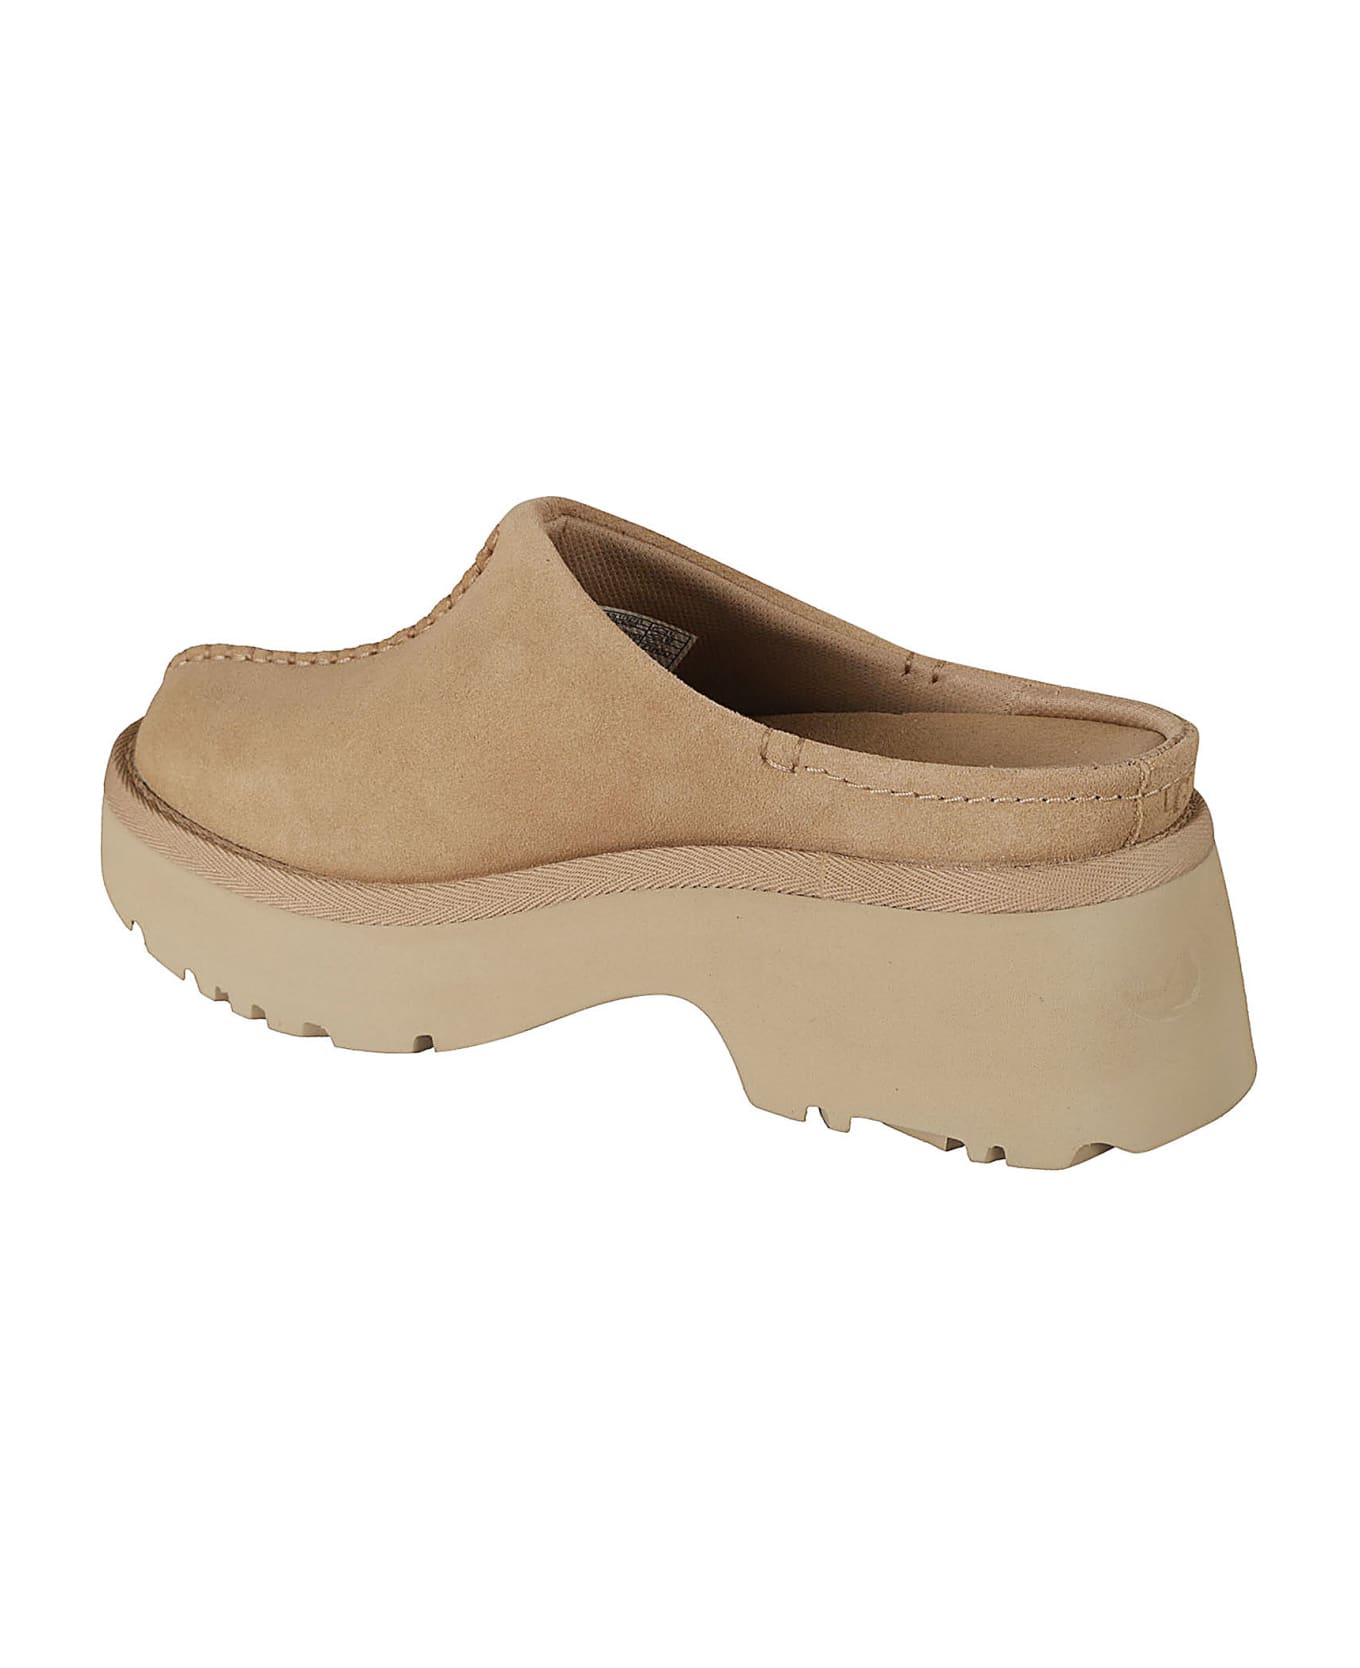 UGG New Heights Clogs - SAND